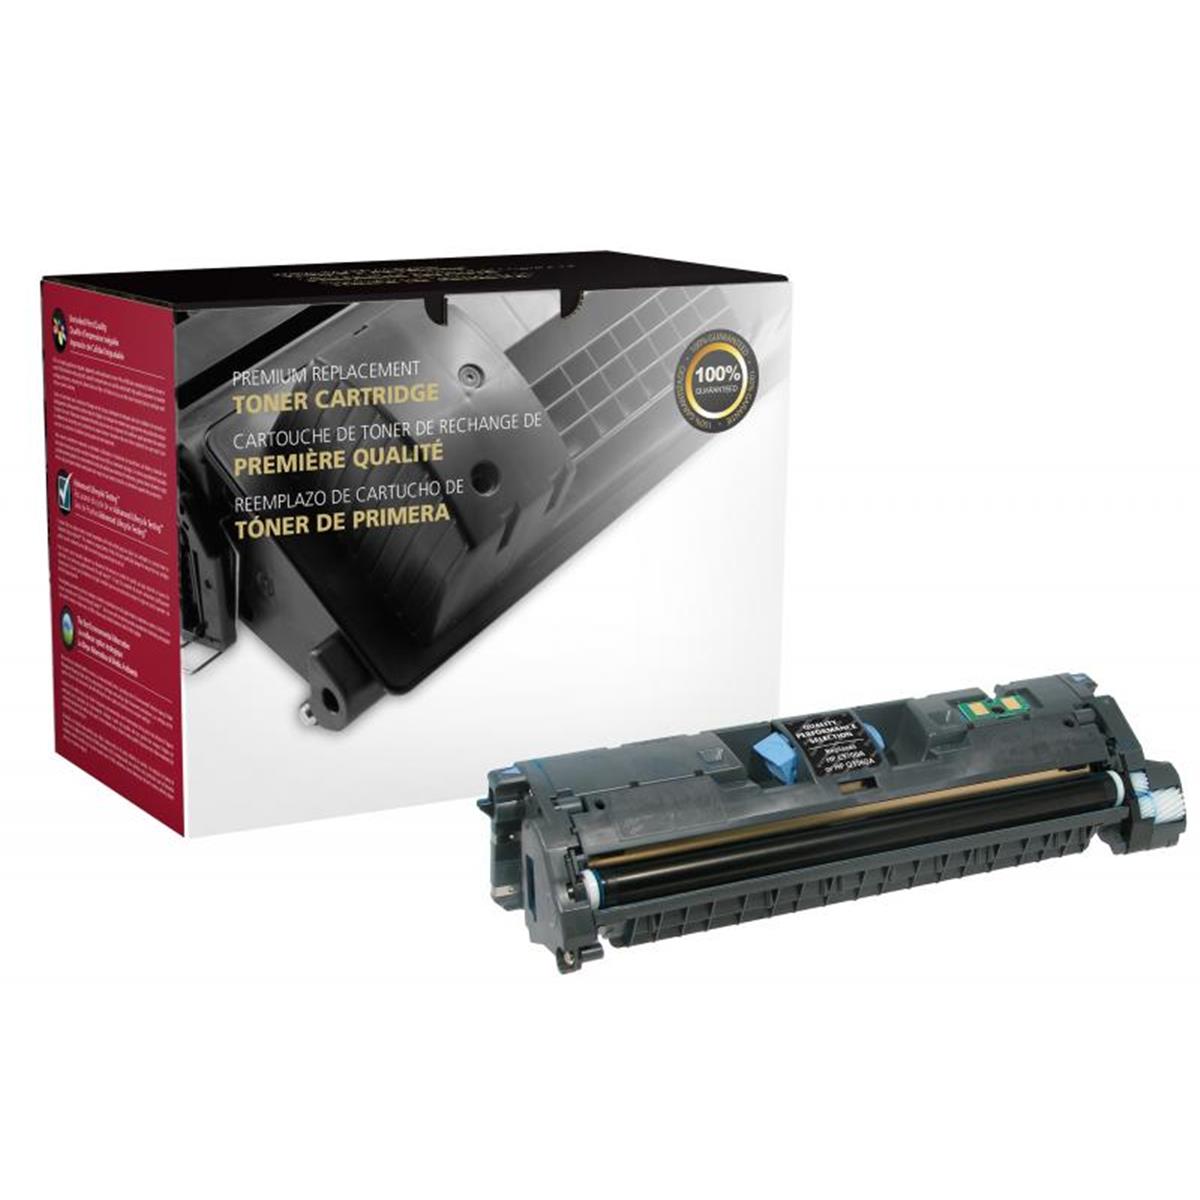 Picture of 114024 Black Toner Cartridge for C9700A & Q3960A